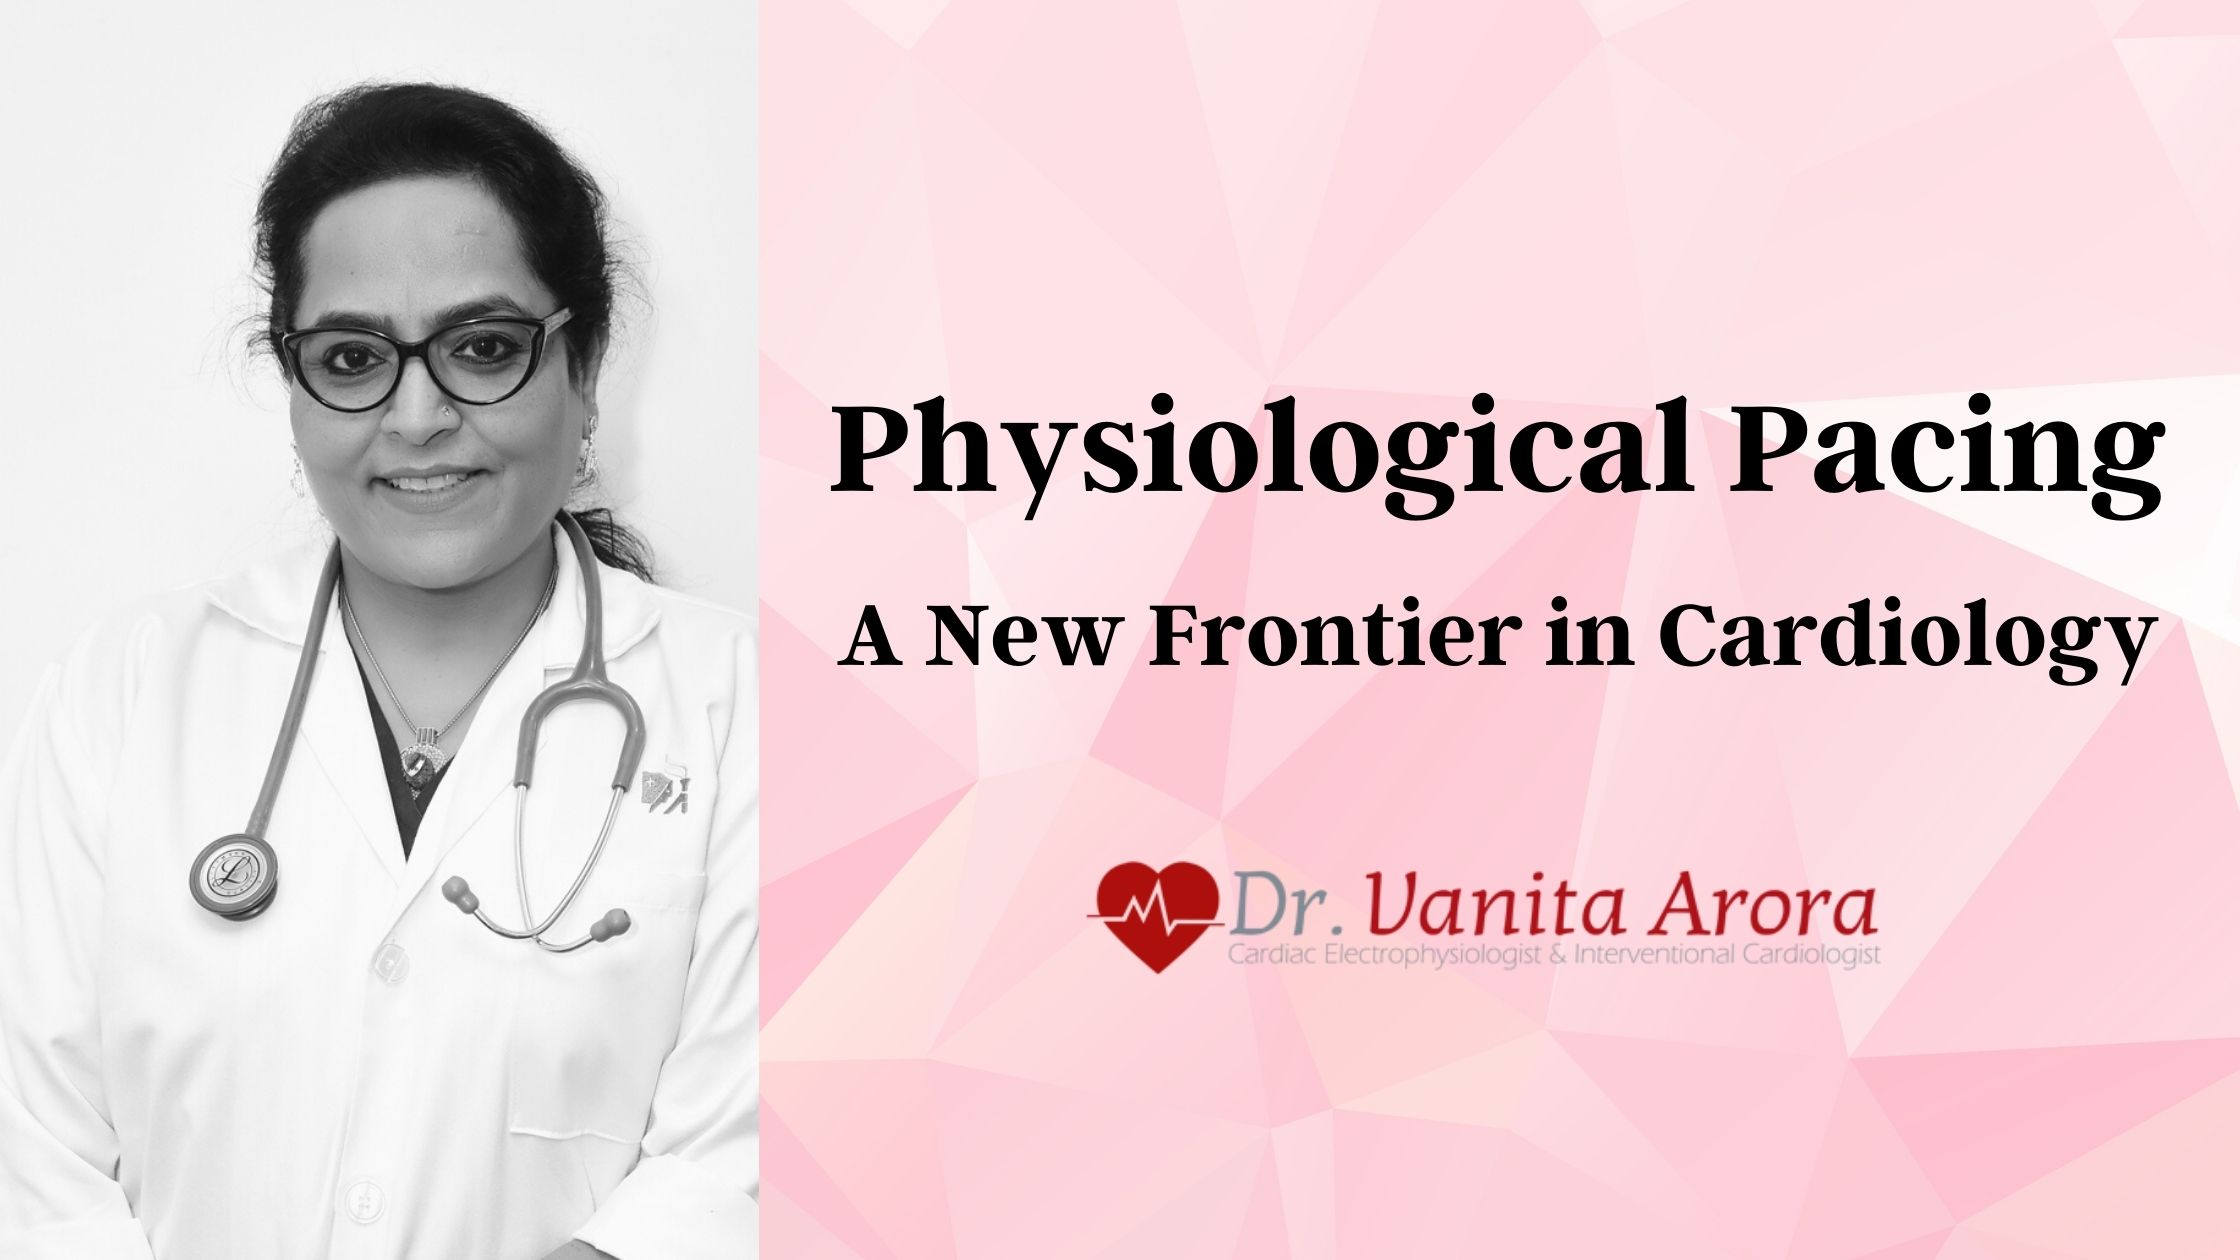 Physiological Pacing: A New Frontier in Cardiology